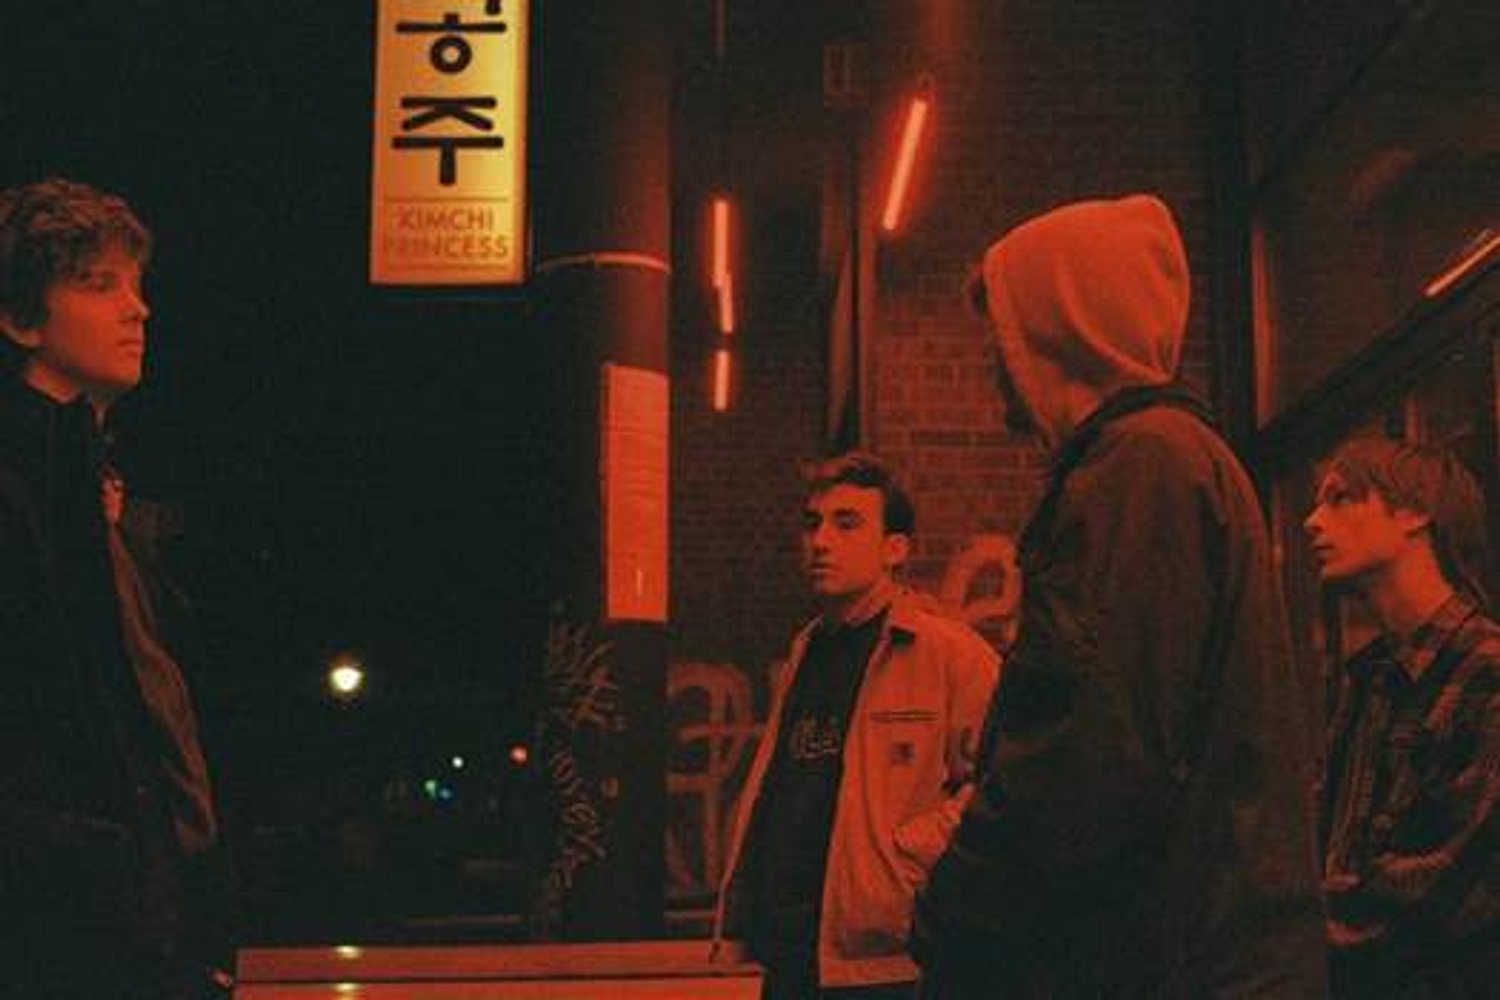 Berlin’s The Usual Boys share new track ‘First Date’